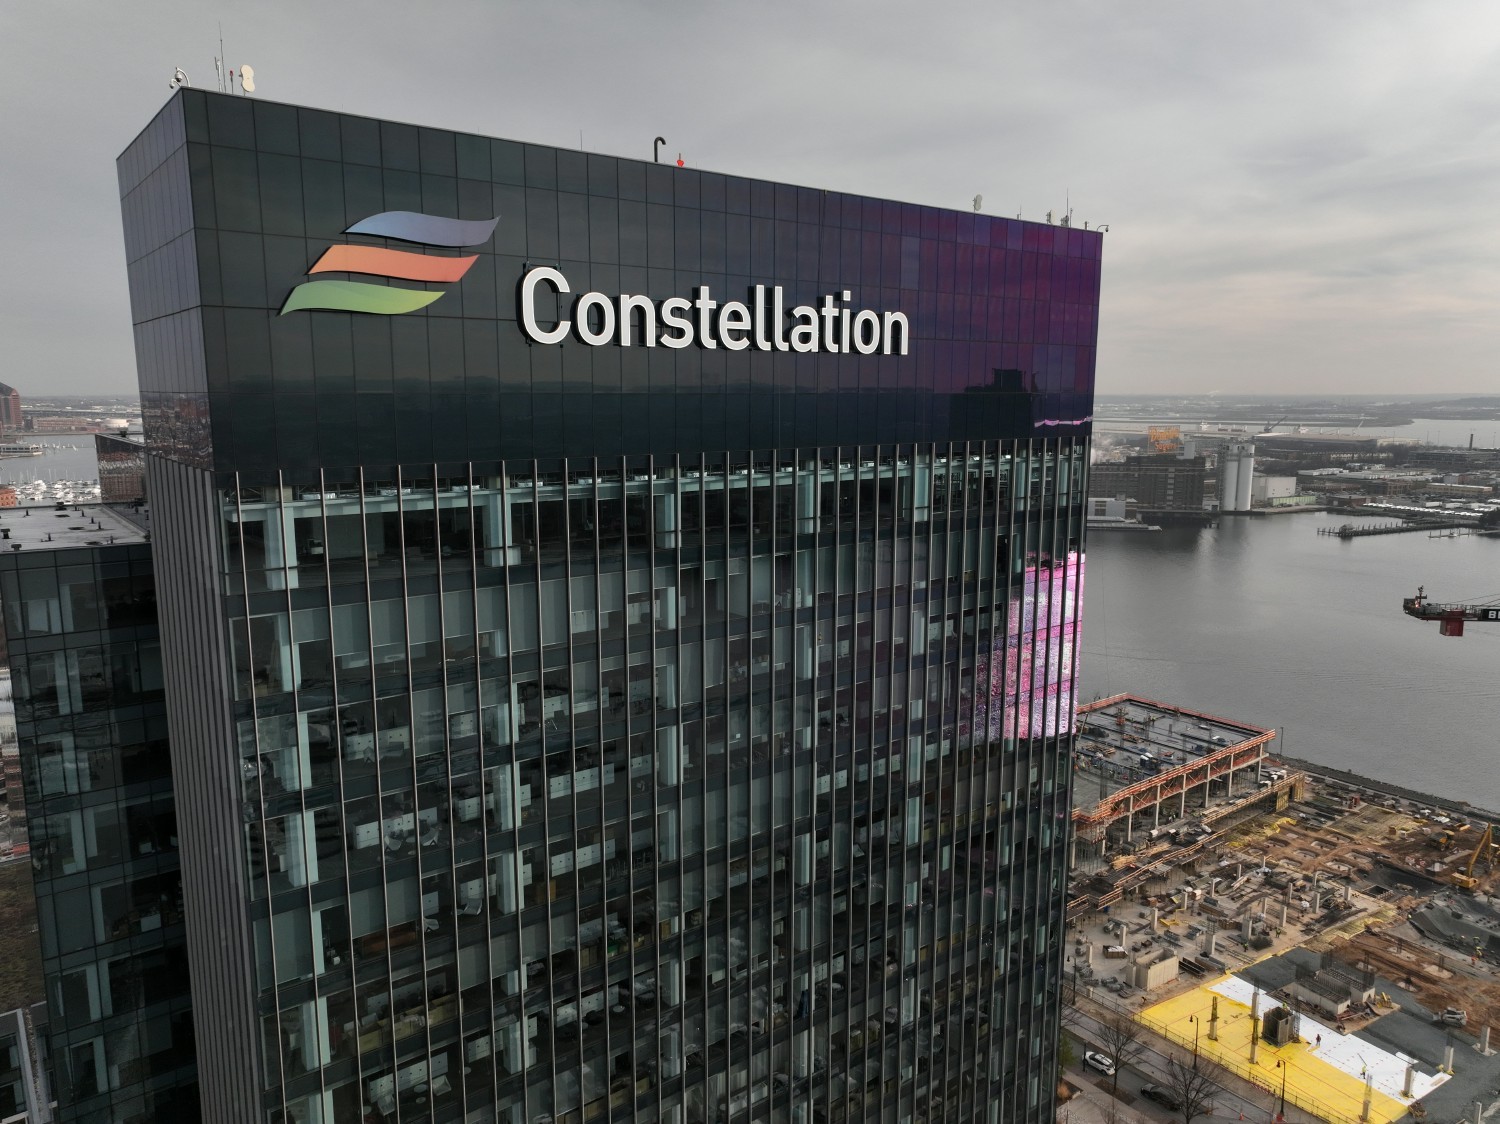 A Fortune 200 company headquartered in Baltimore, MD, Constellation produces clean energy to power 15M+ U.S. homes.